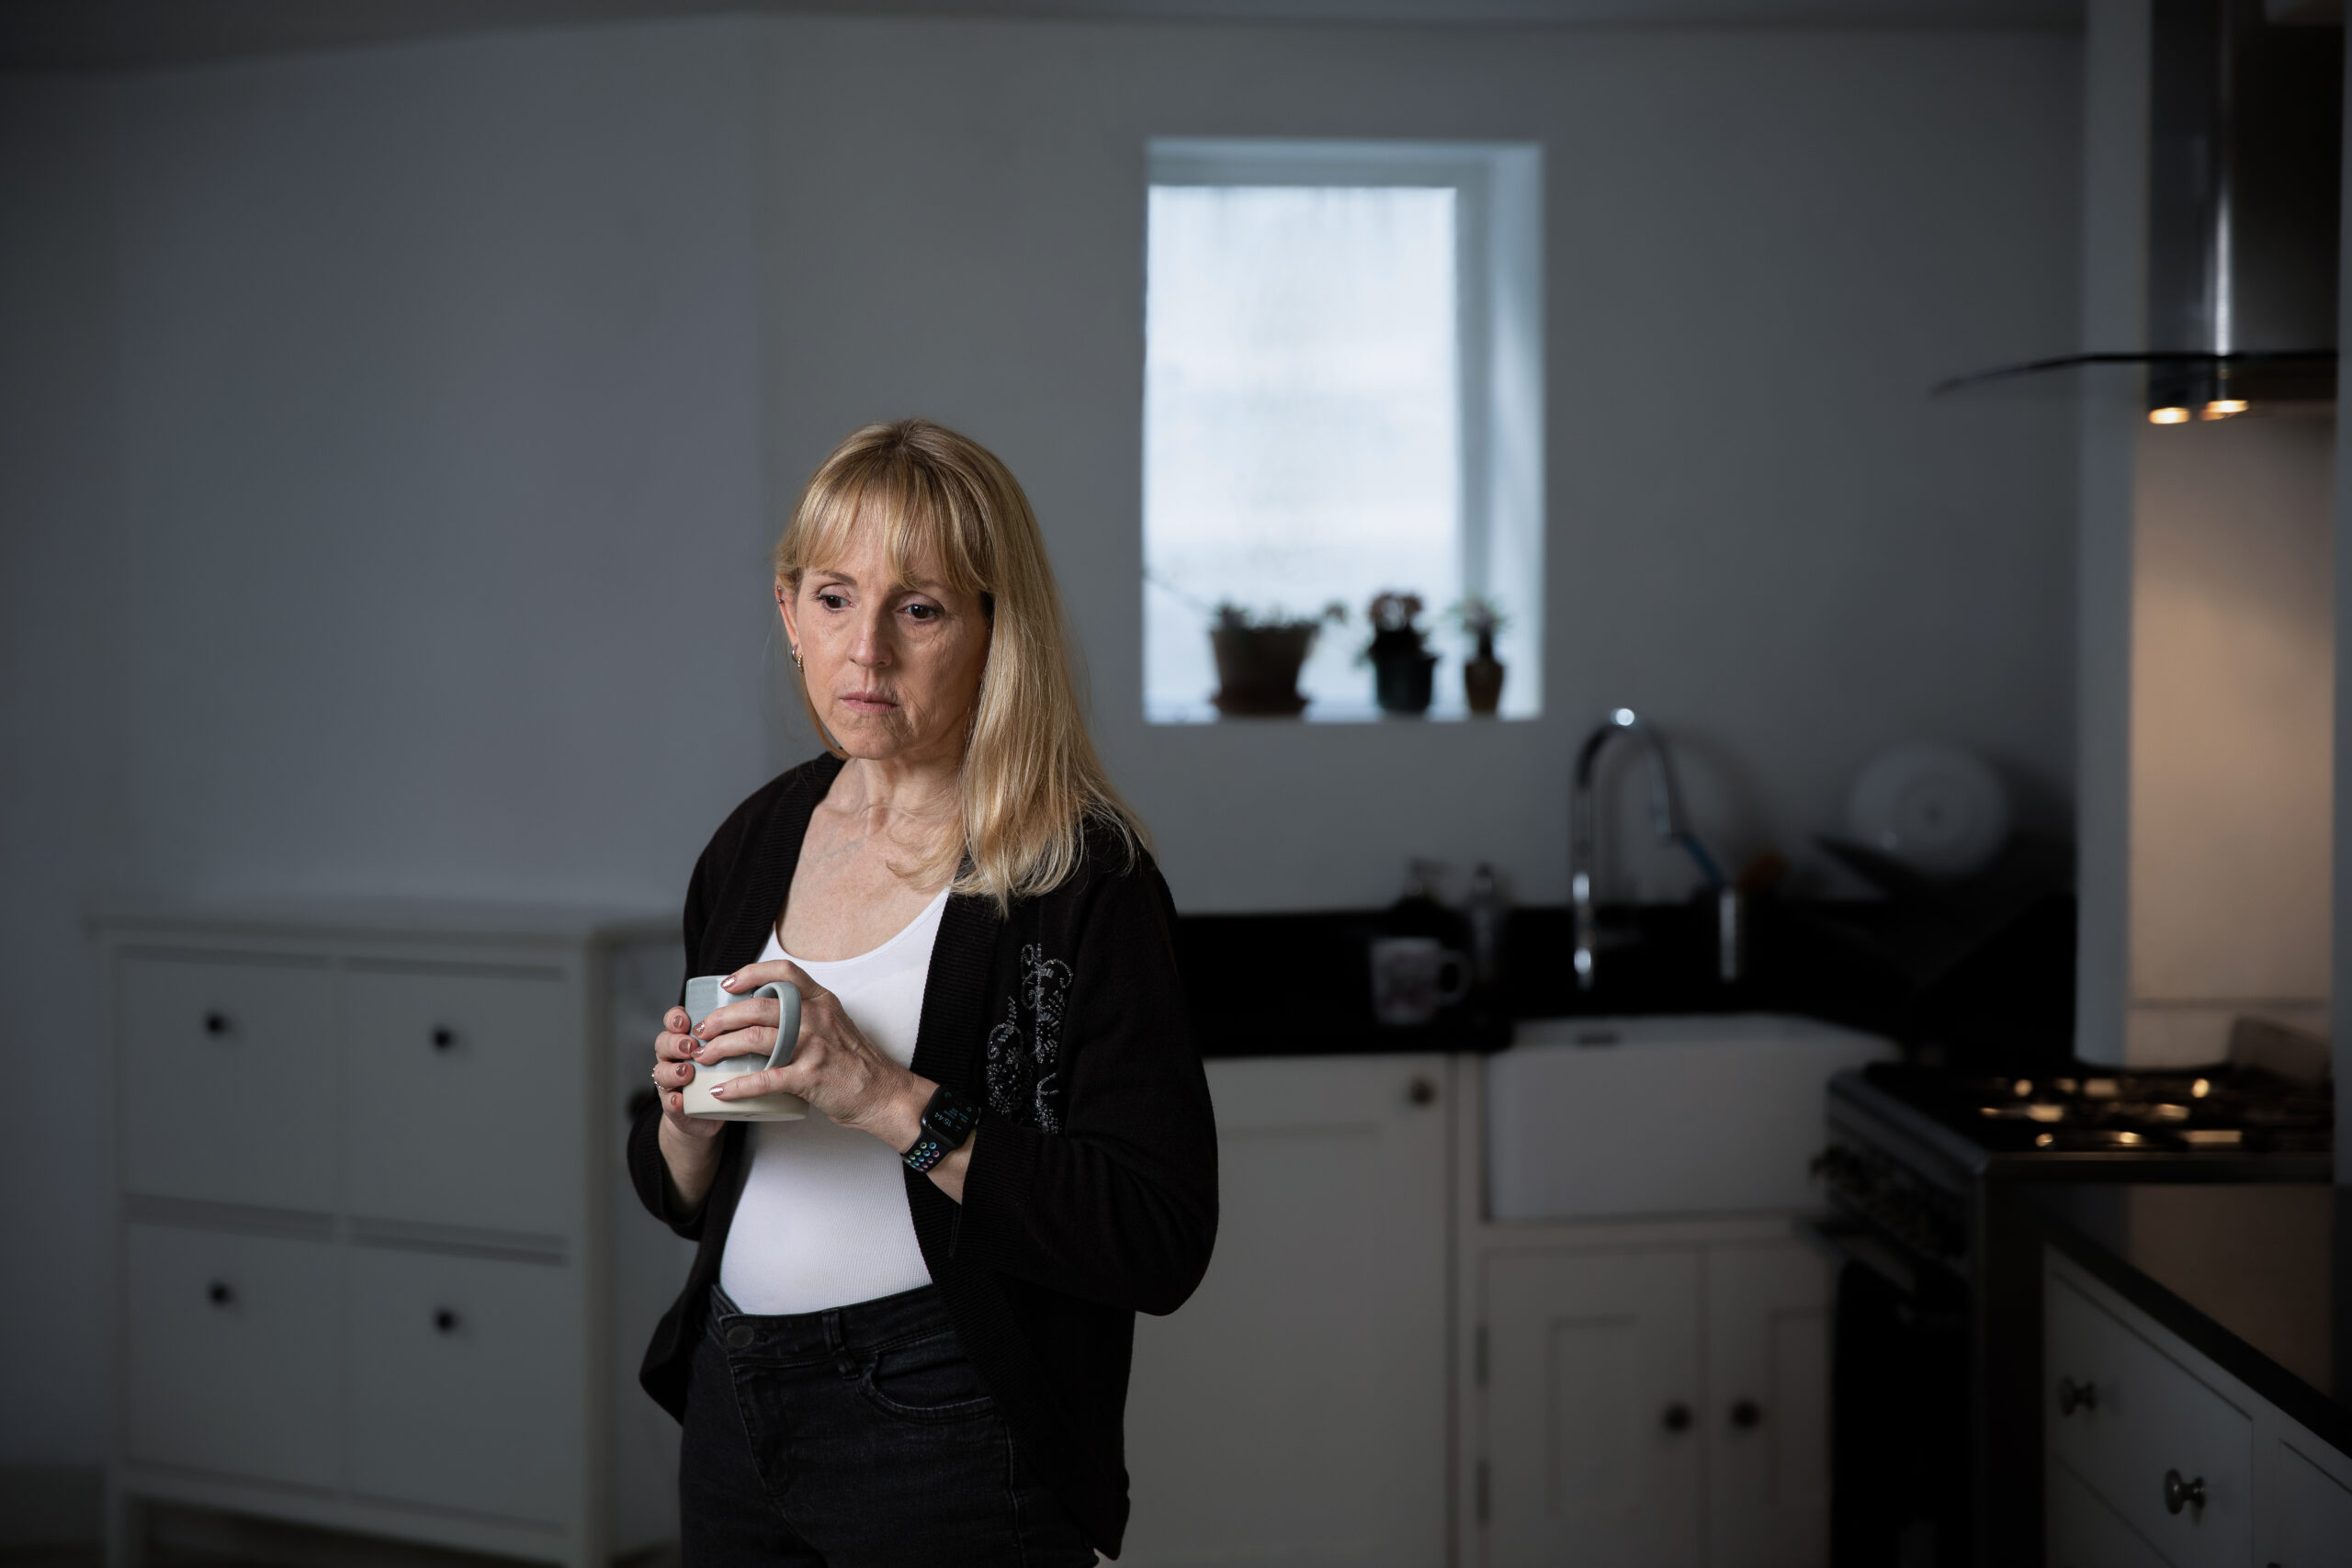 A blond woman stands in her kitchen holding a mug of tea. She is looking down at the floor.